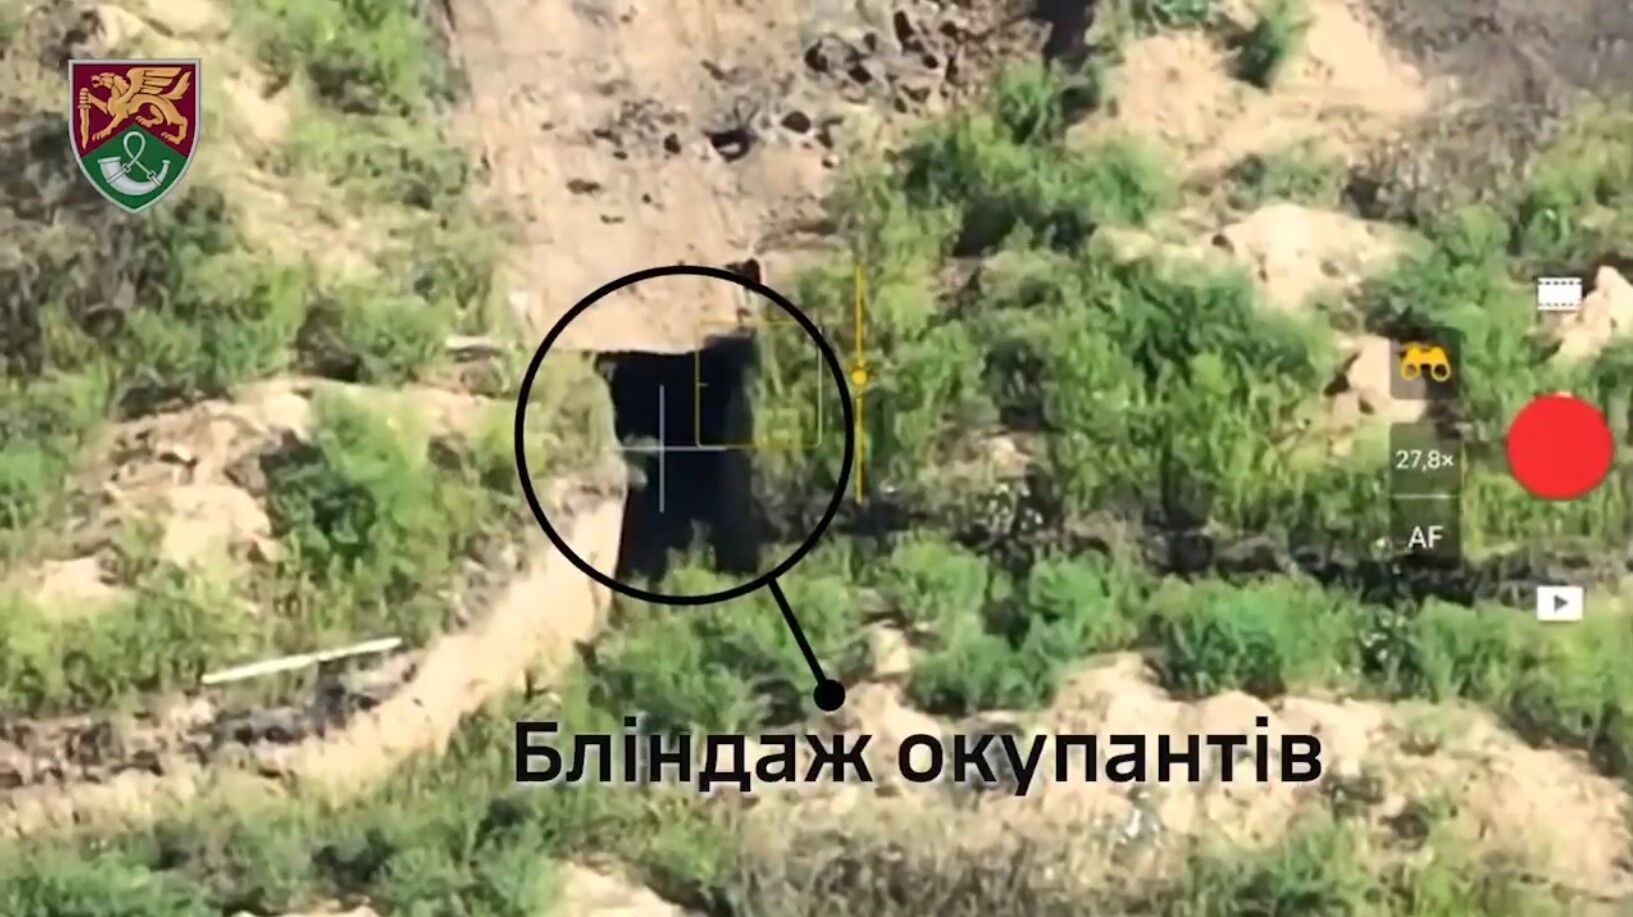 Paratroopers showed how they knocked out the enemy from their positions: the occupants fled, but were destroyed. Video